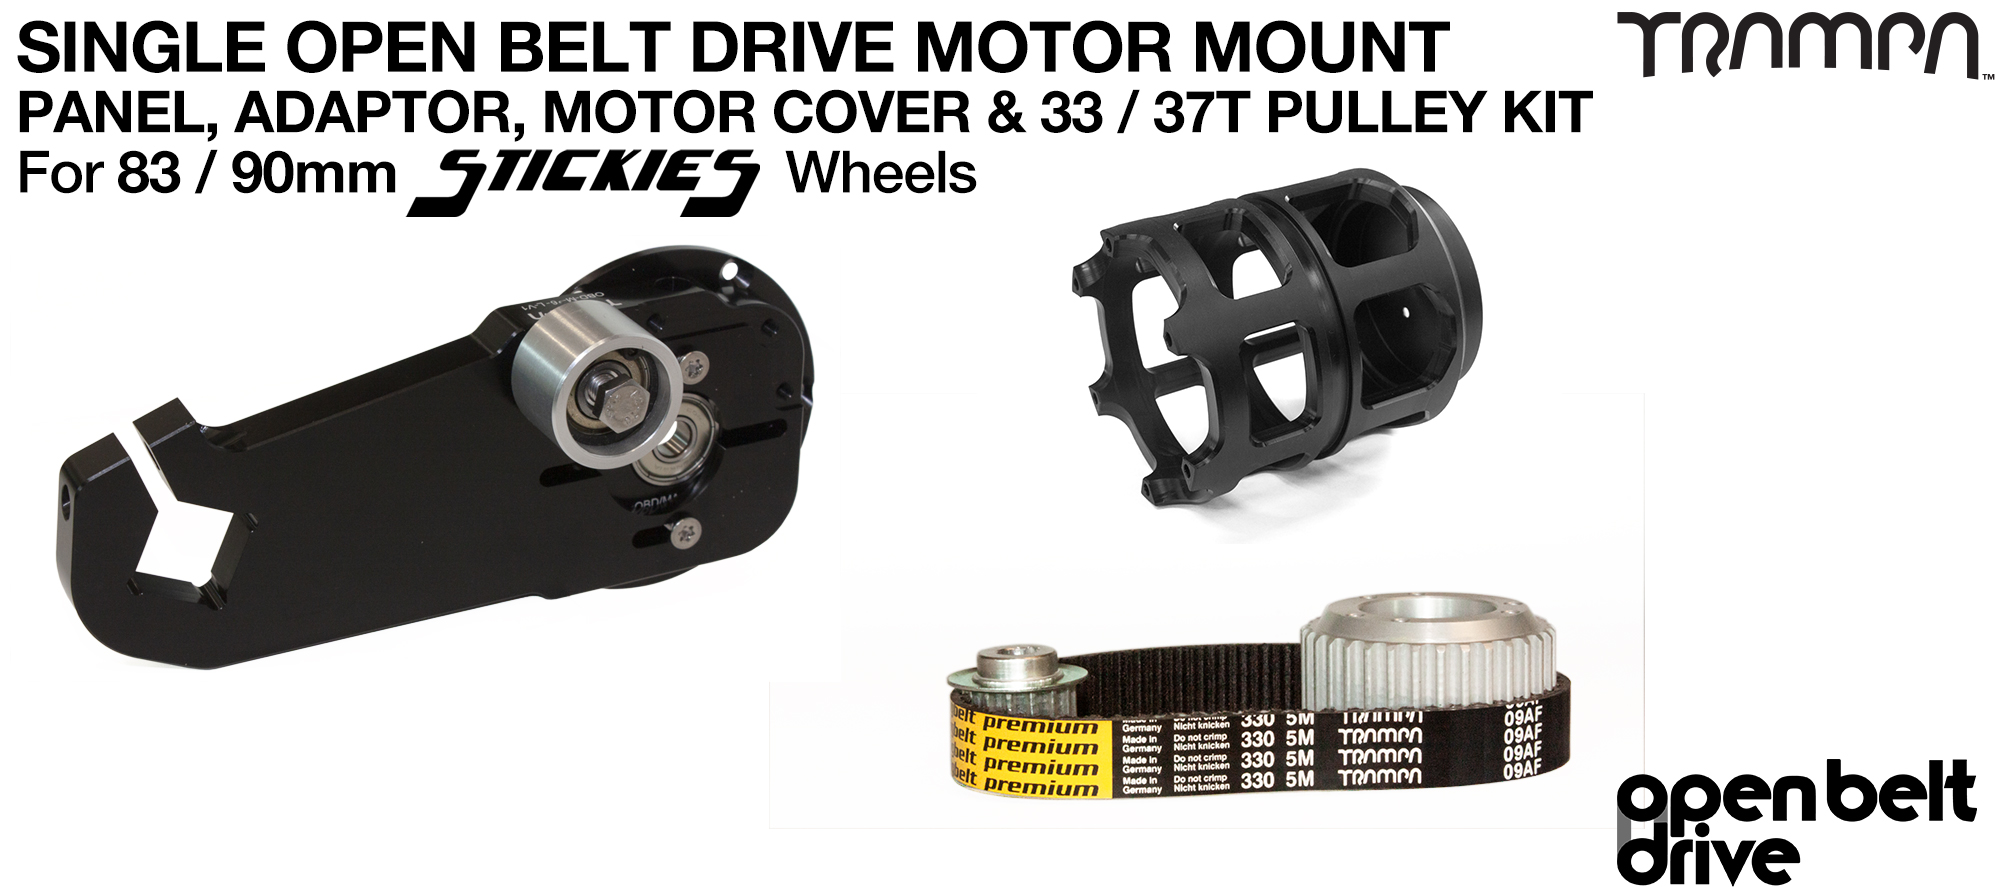 66T OBD Motor Mount with 33 / 37T Pulley kit & Motor Filters - SINGLE